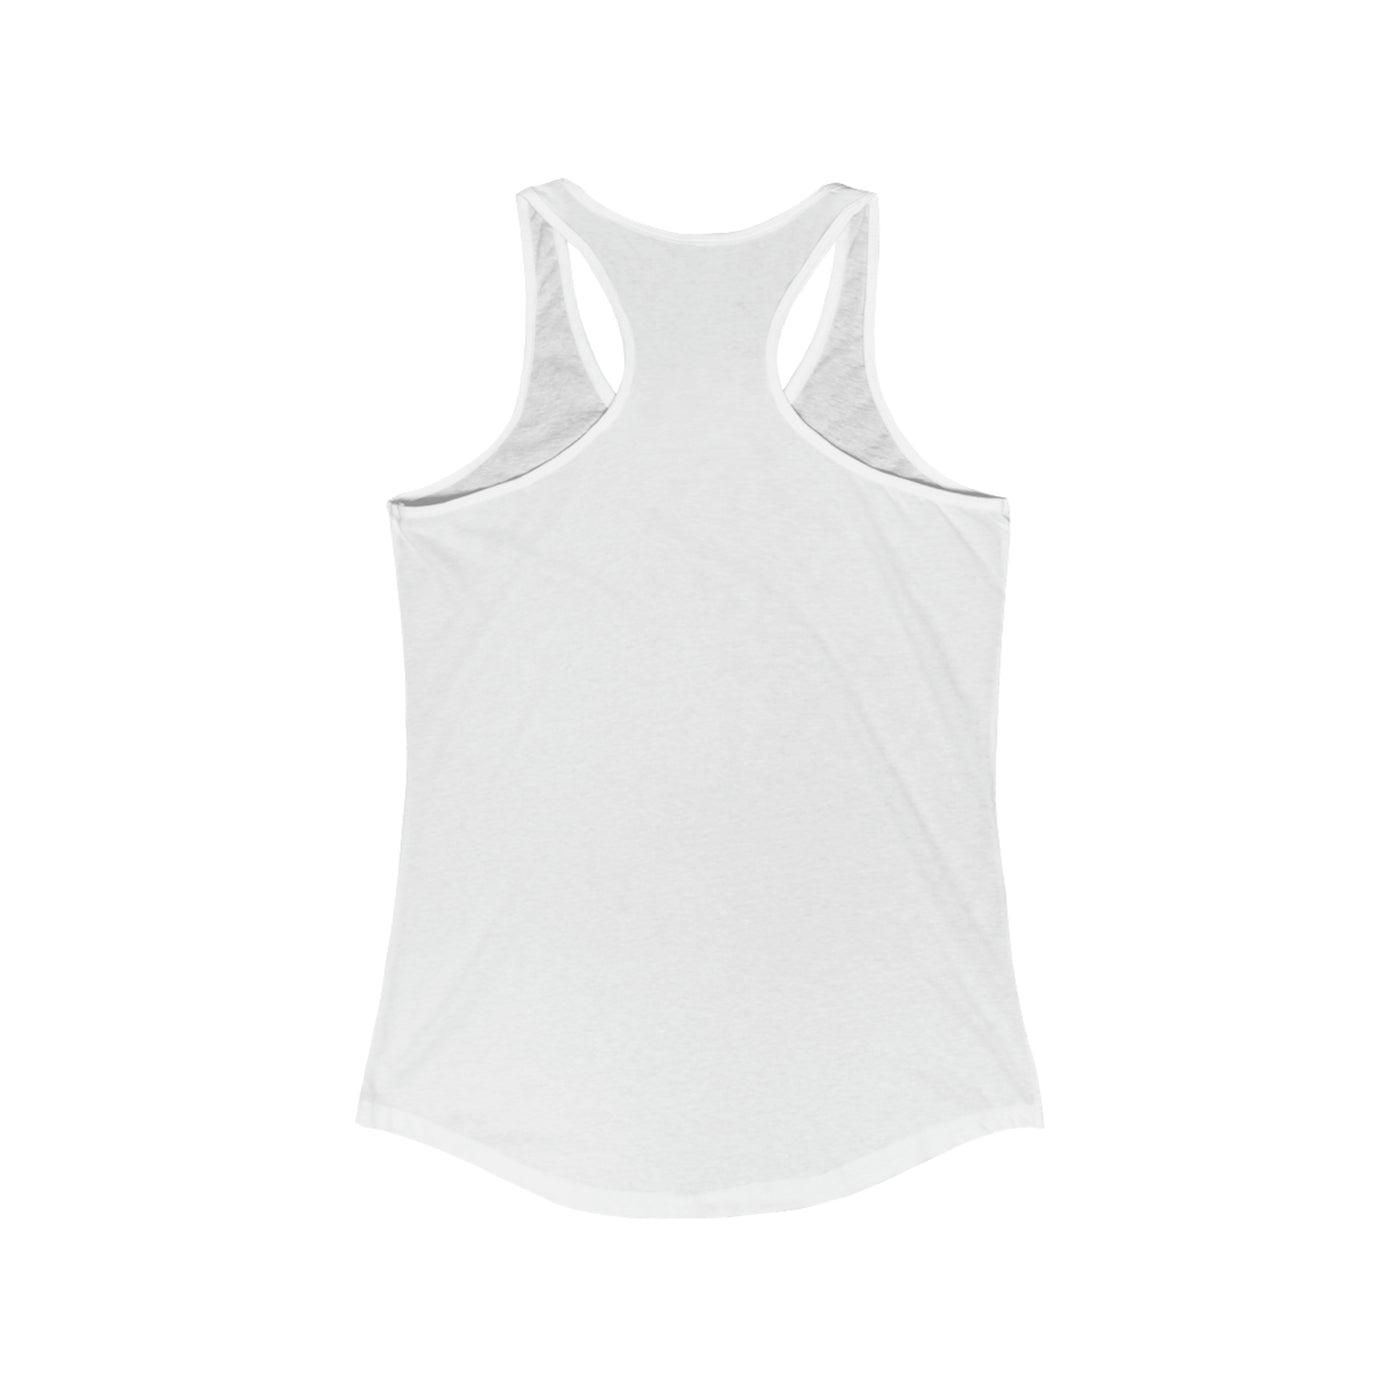 GPAA Chapters United in the Pursuit of Gold Women's Racerback Tank